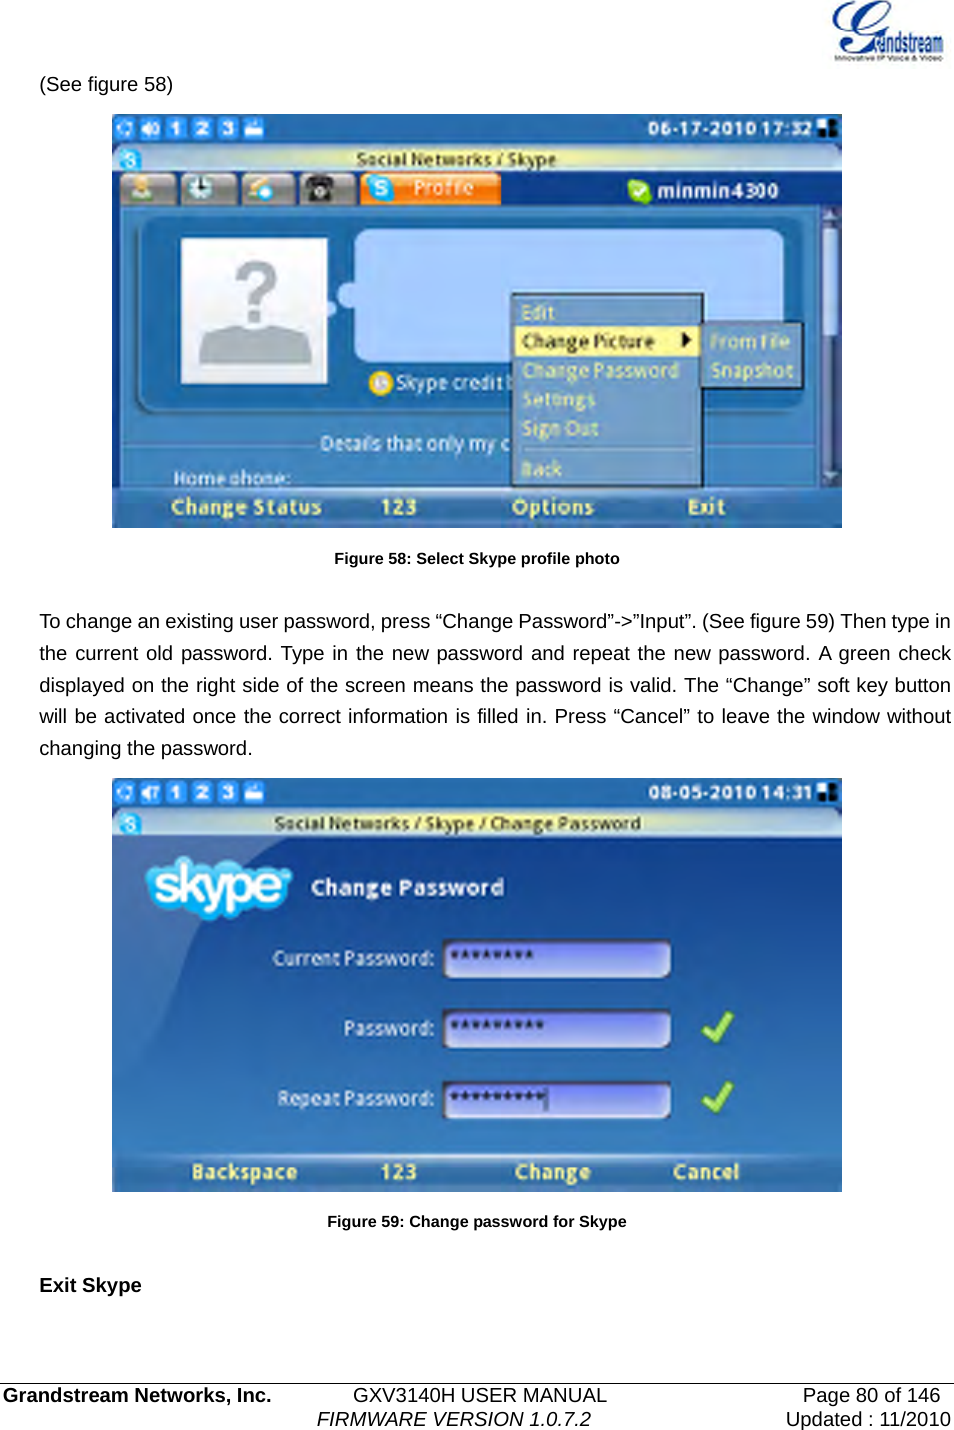   Grandstream Networks, Inc.        GXV3140H USER MANUAL                  Page 80 of 146                                FIRMWARE VERSION 1.0.7.2 Updated : 11/2010  (See figure 58)  Figure 58: Select Skype profile photo  To change an existing user password, press “Change Password”-&gt;”Input”. (See figure 59) Then type in the current old password. Type in the new password and repeat the new password. A green check displayed on the right side of the screen means the password is valid. The “Change” soft key button will be activated once the correct information is filled in. Press “Cancel” to leave the window without changing the password.  Figure 59: Change password for Skype  Exit Skype  